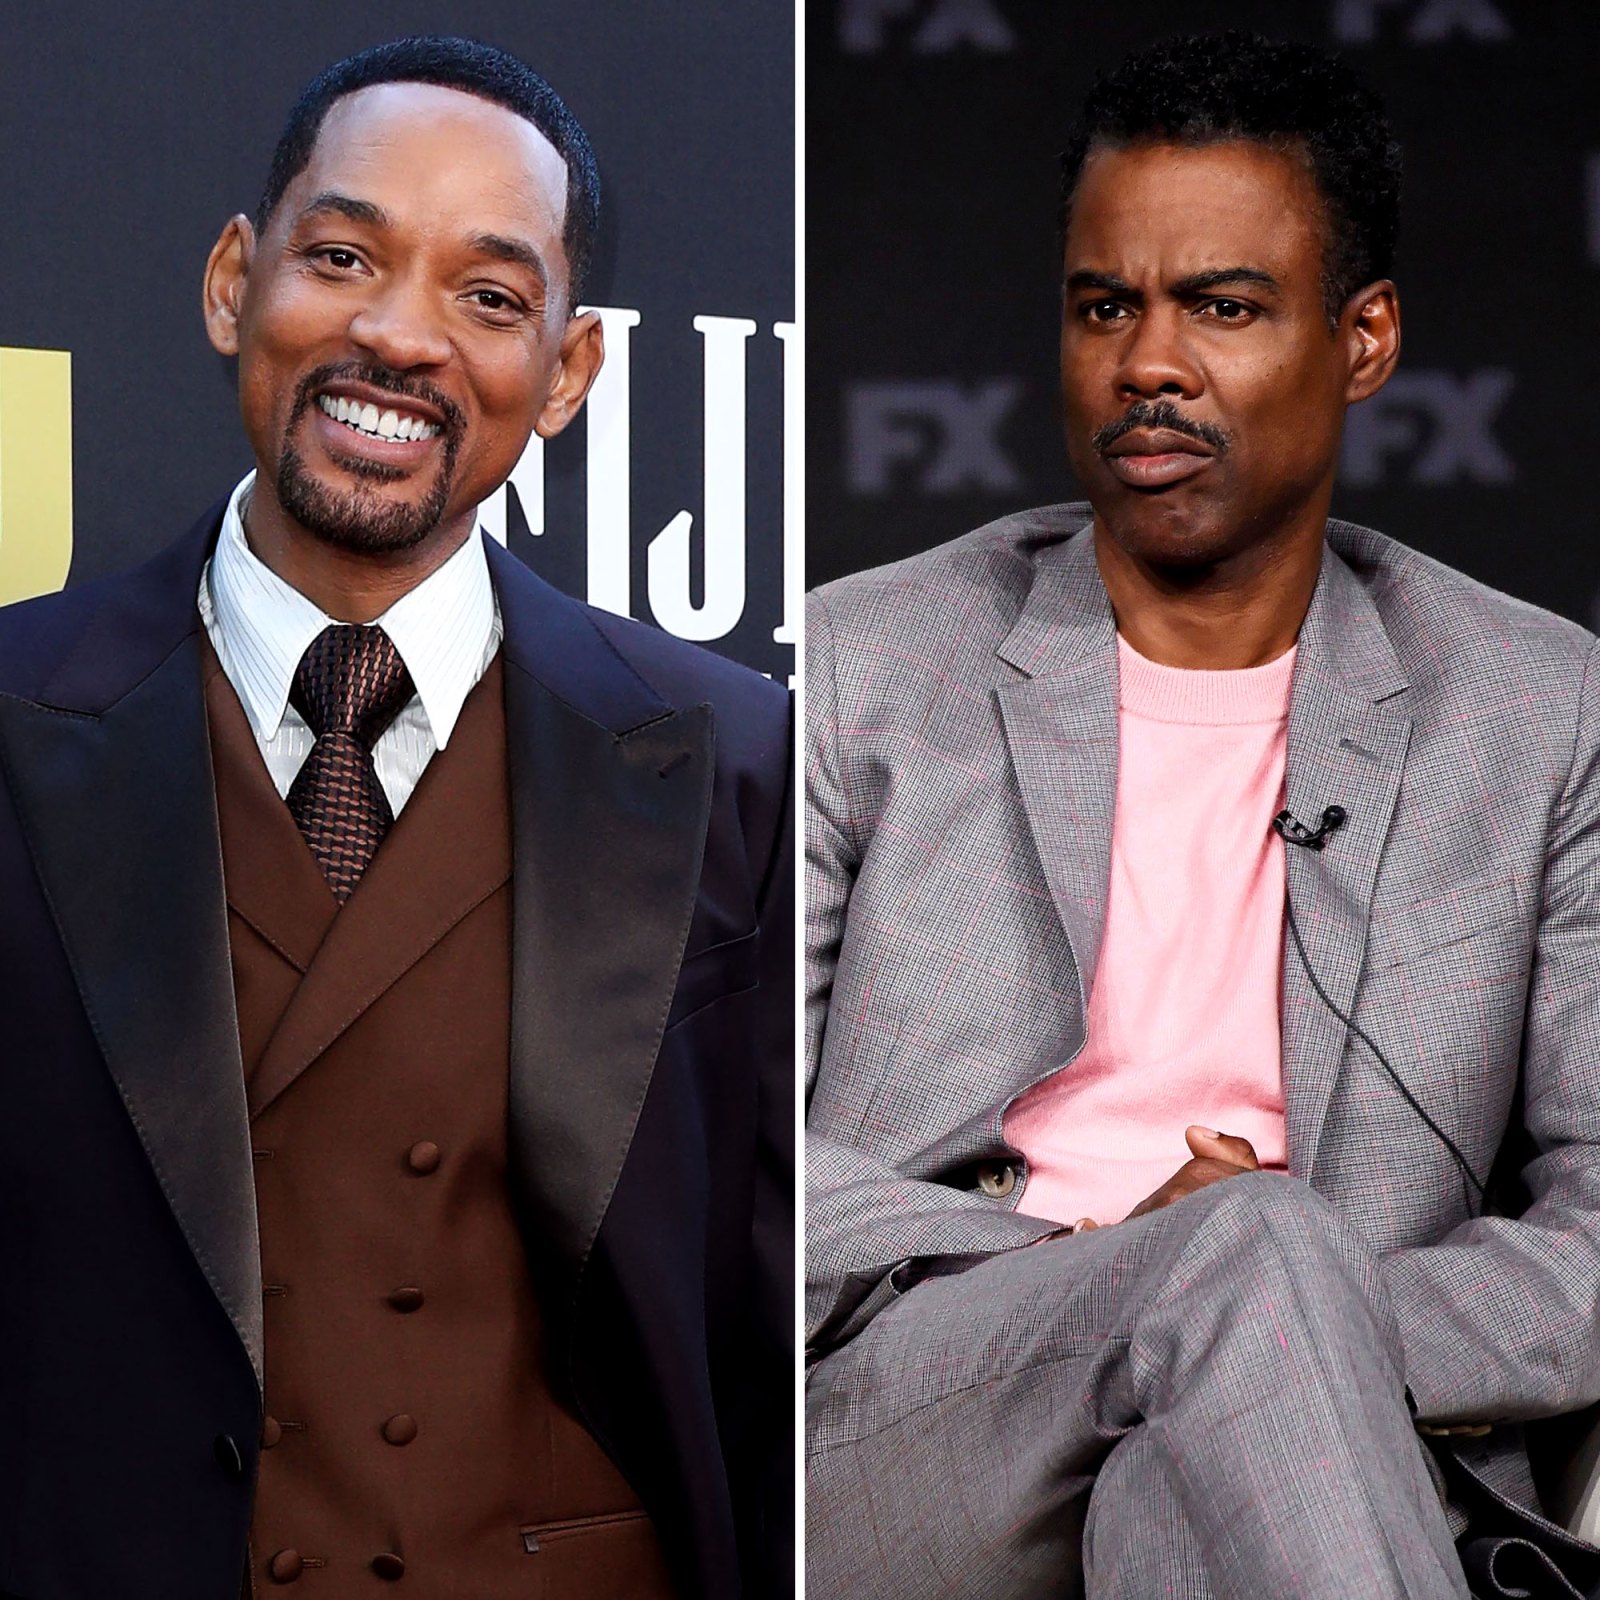 Will Smith Addresses Slap Backlash in Emotional Video: 'It's All Fuzzy'